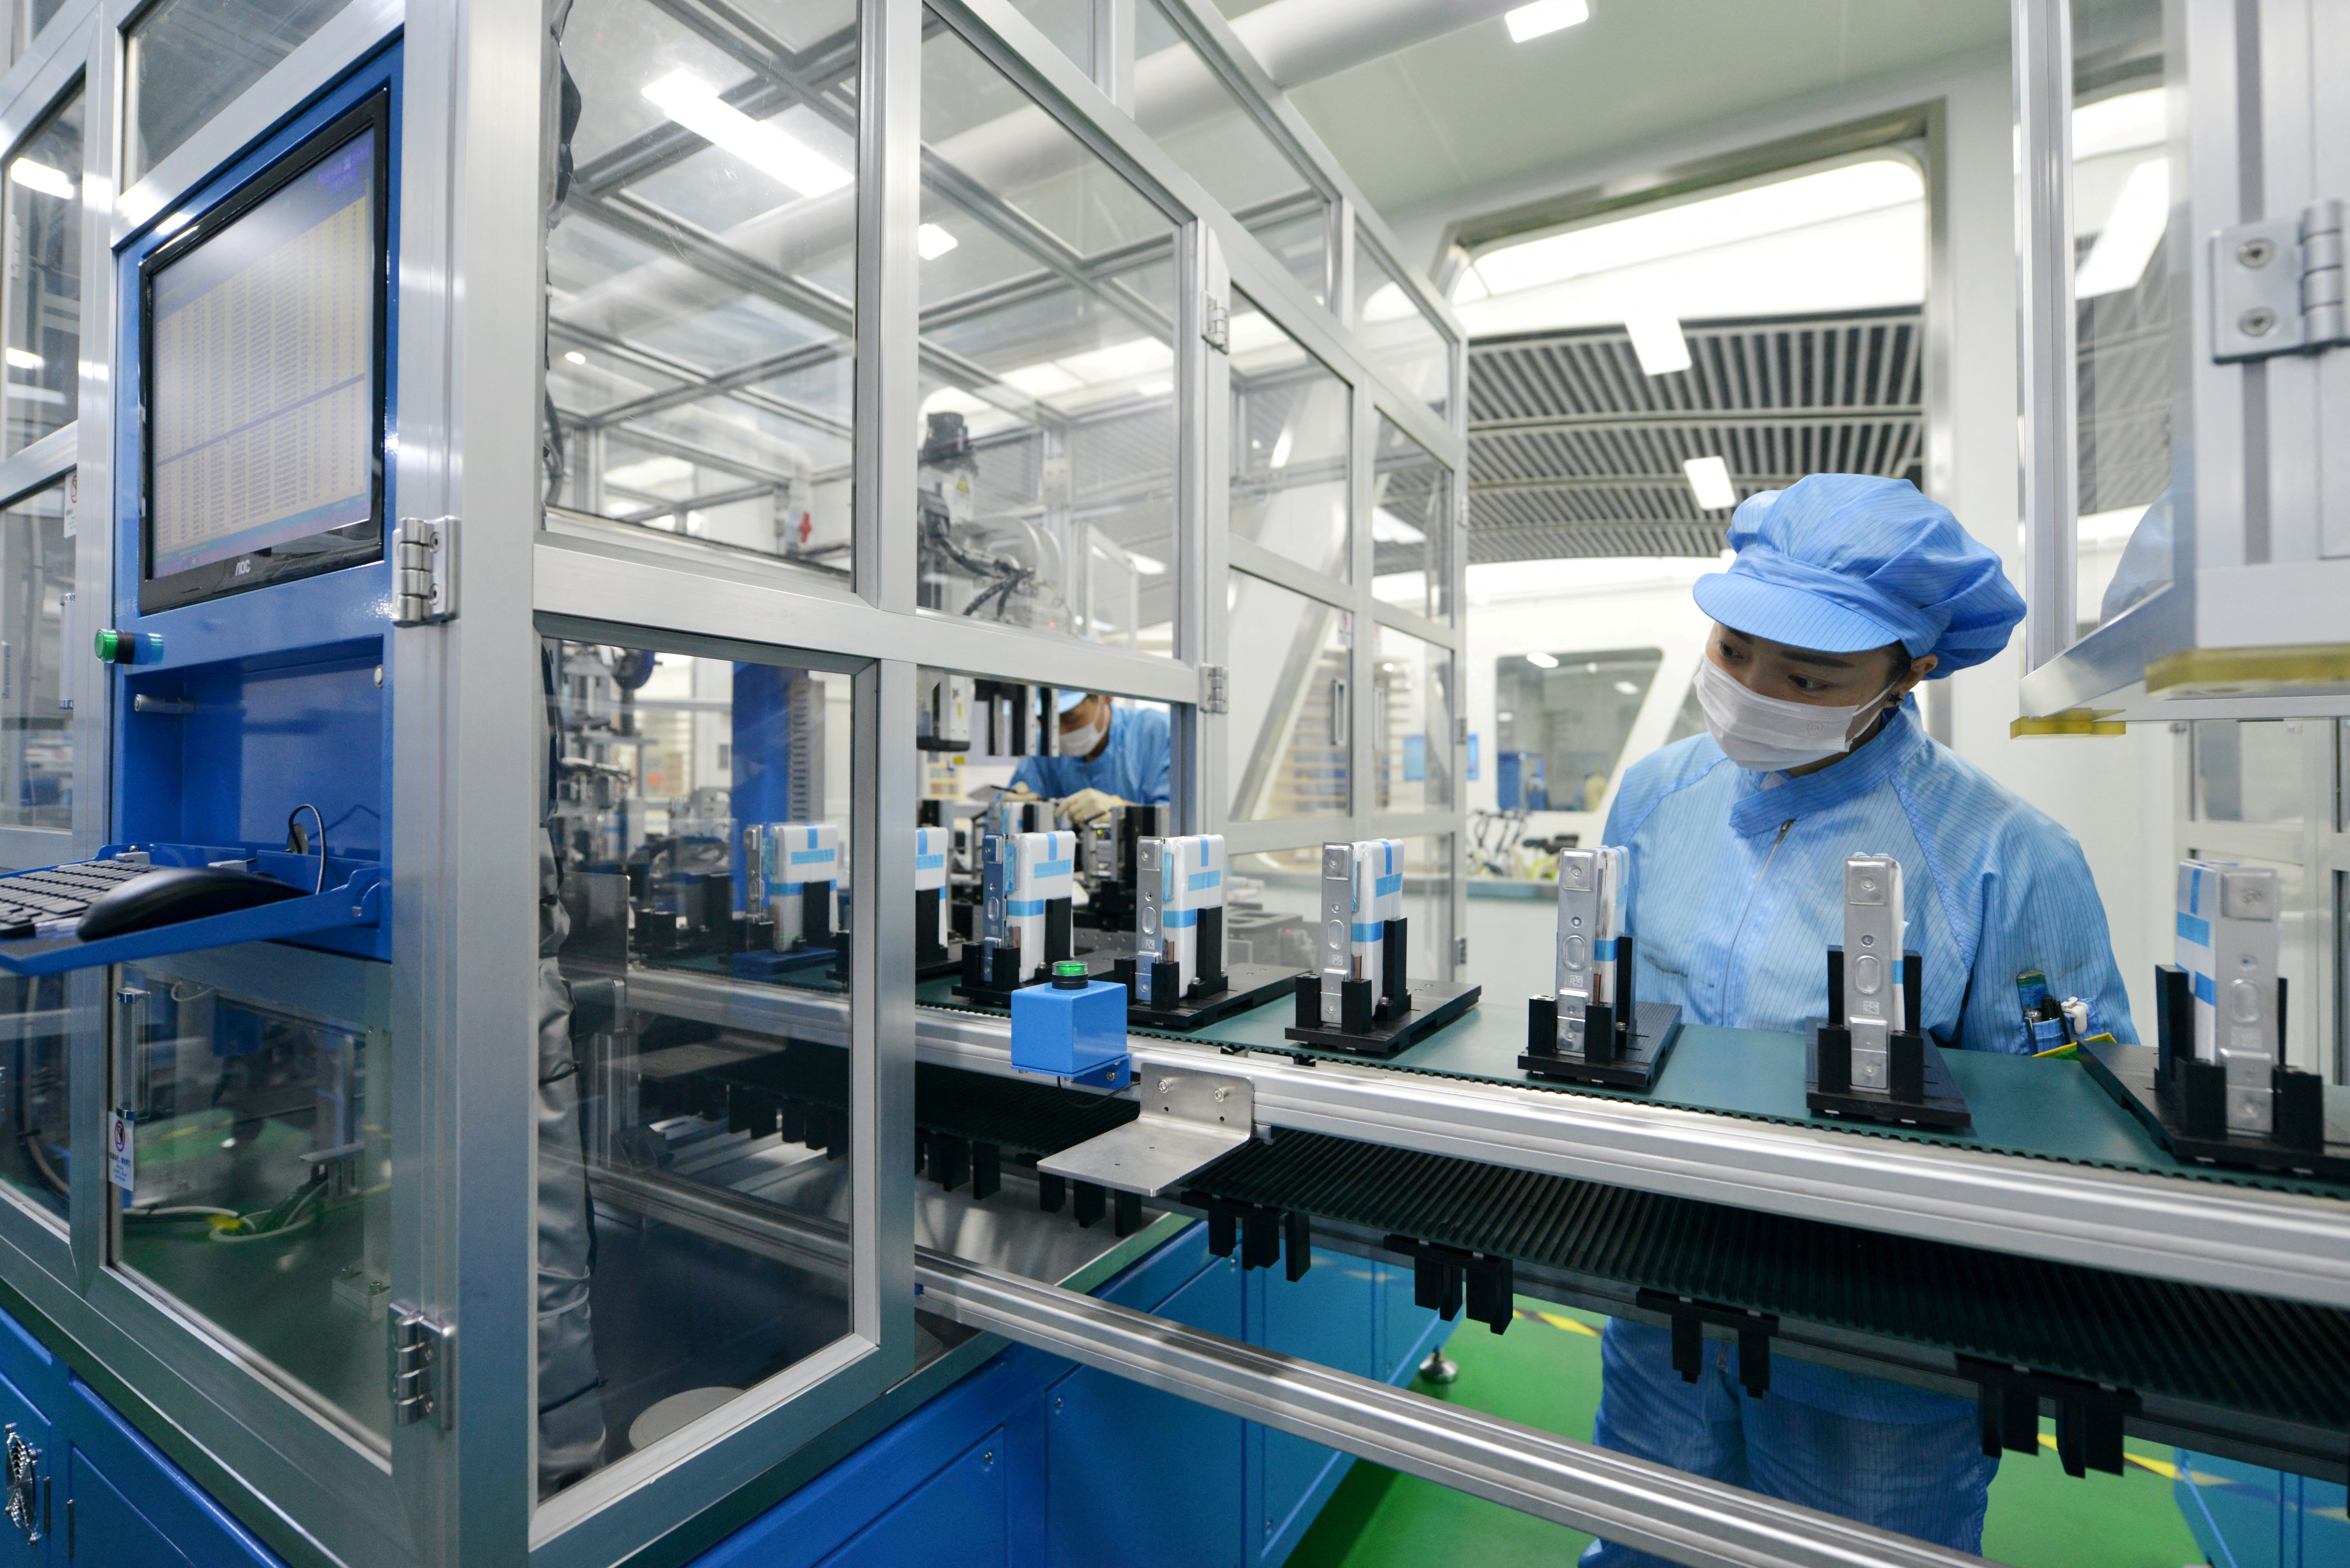 Workers are seen at the production line of lithium-ion batteries for electric vehicles (EV) at a factory in Huzhou